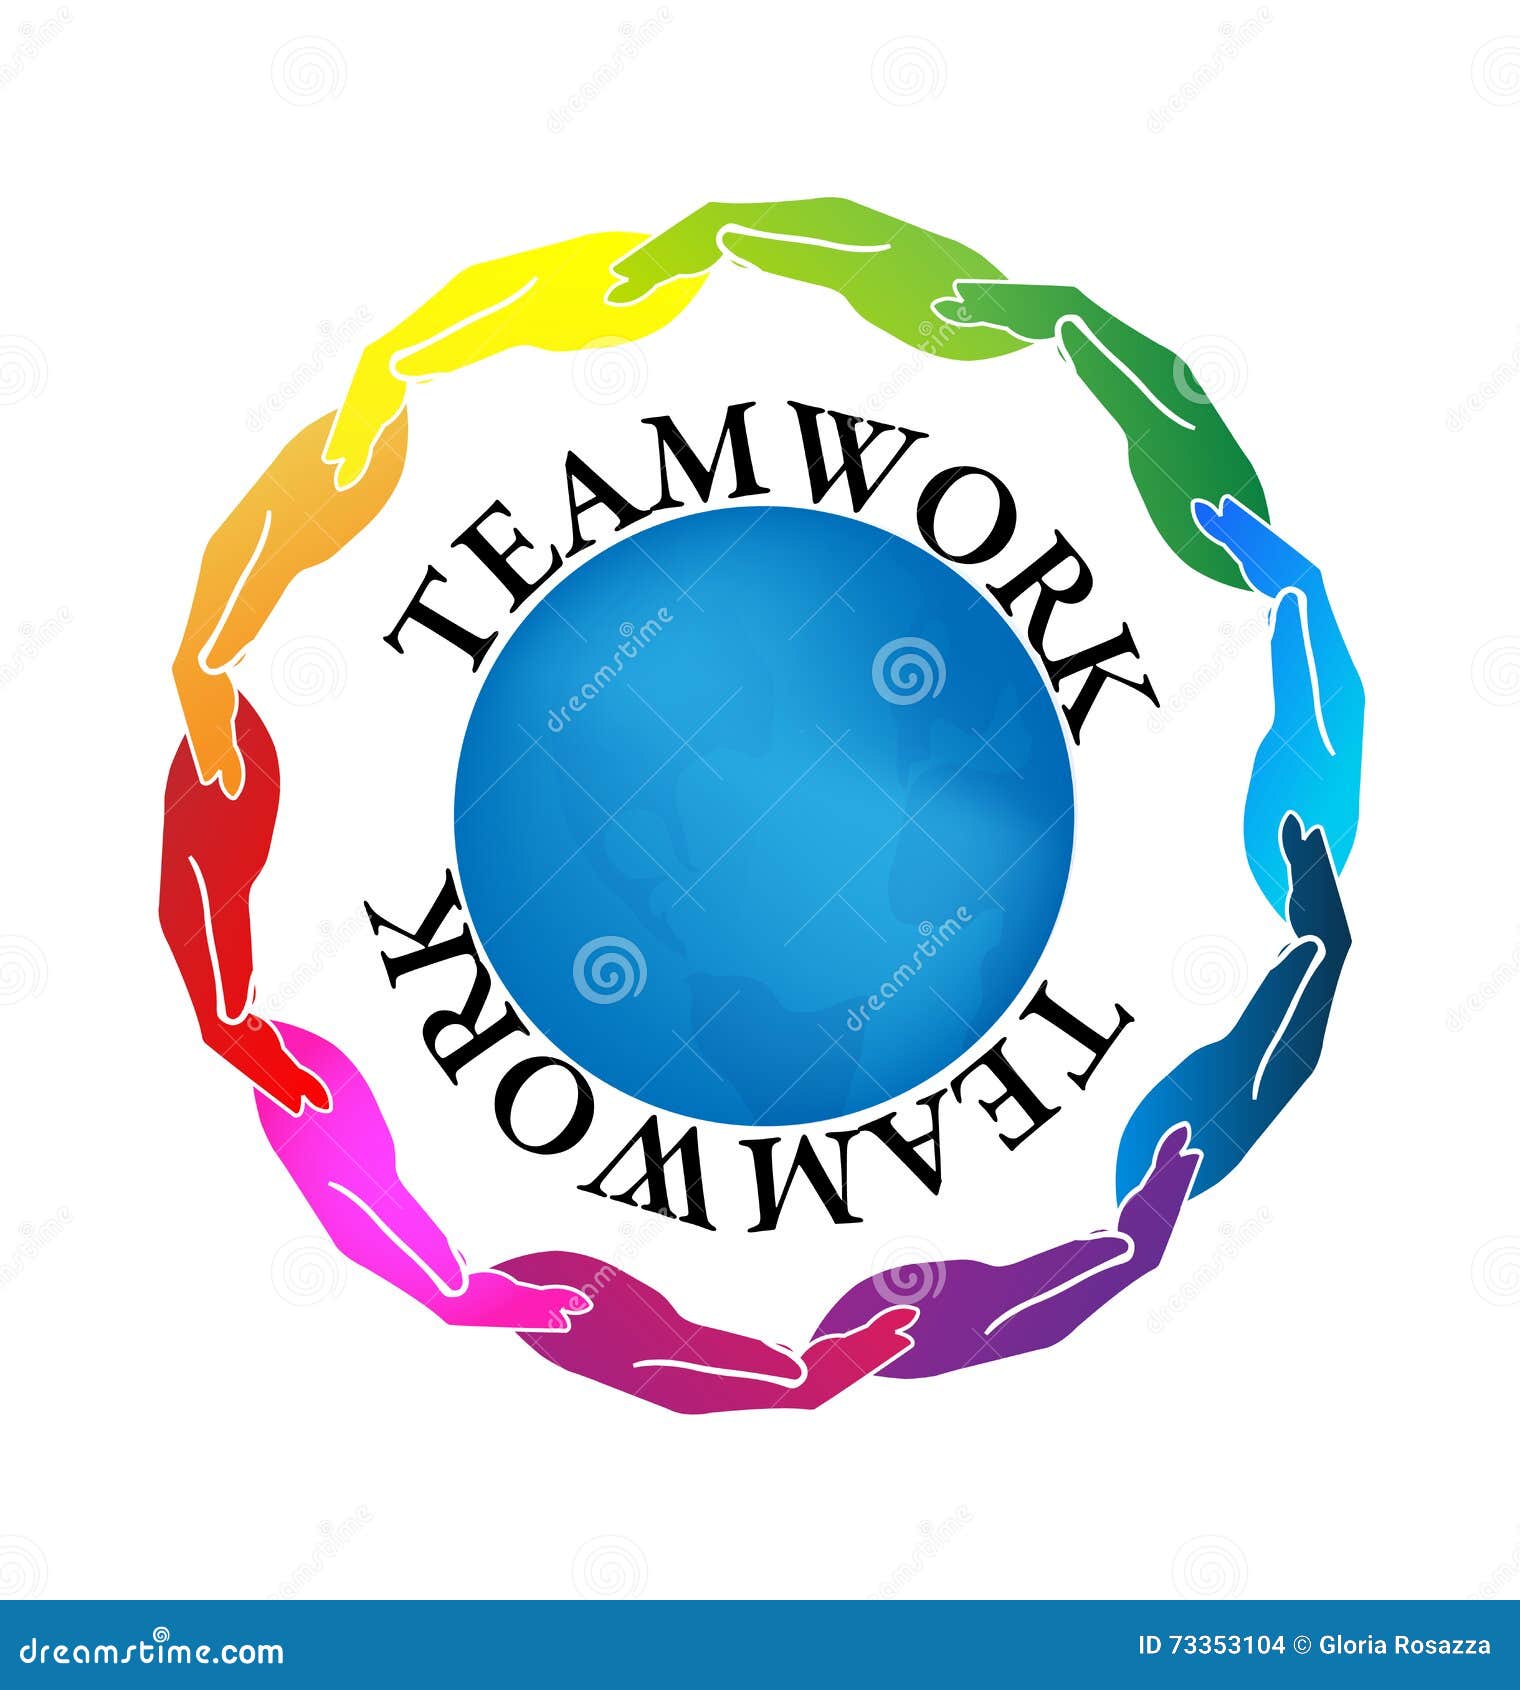 Teamwork hands stock vector. Illustration of colors, body - 73353104